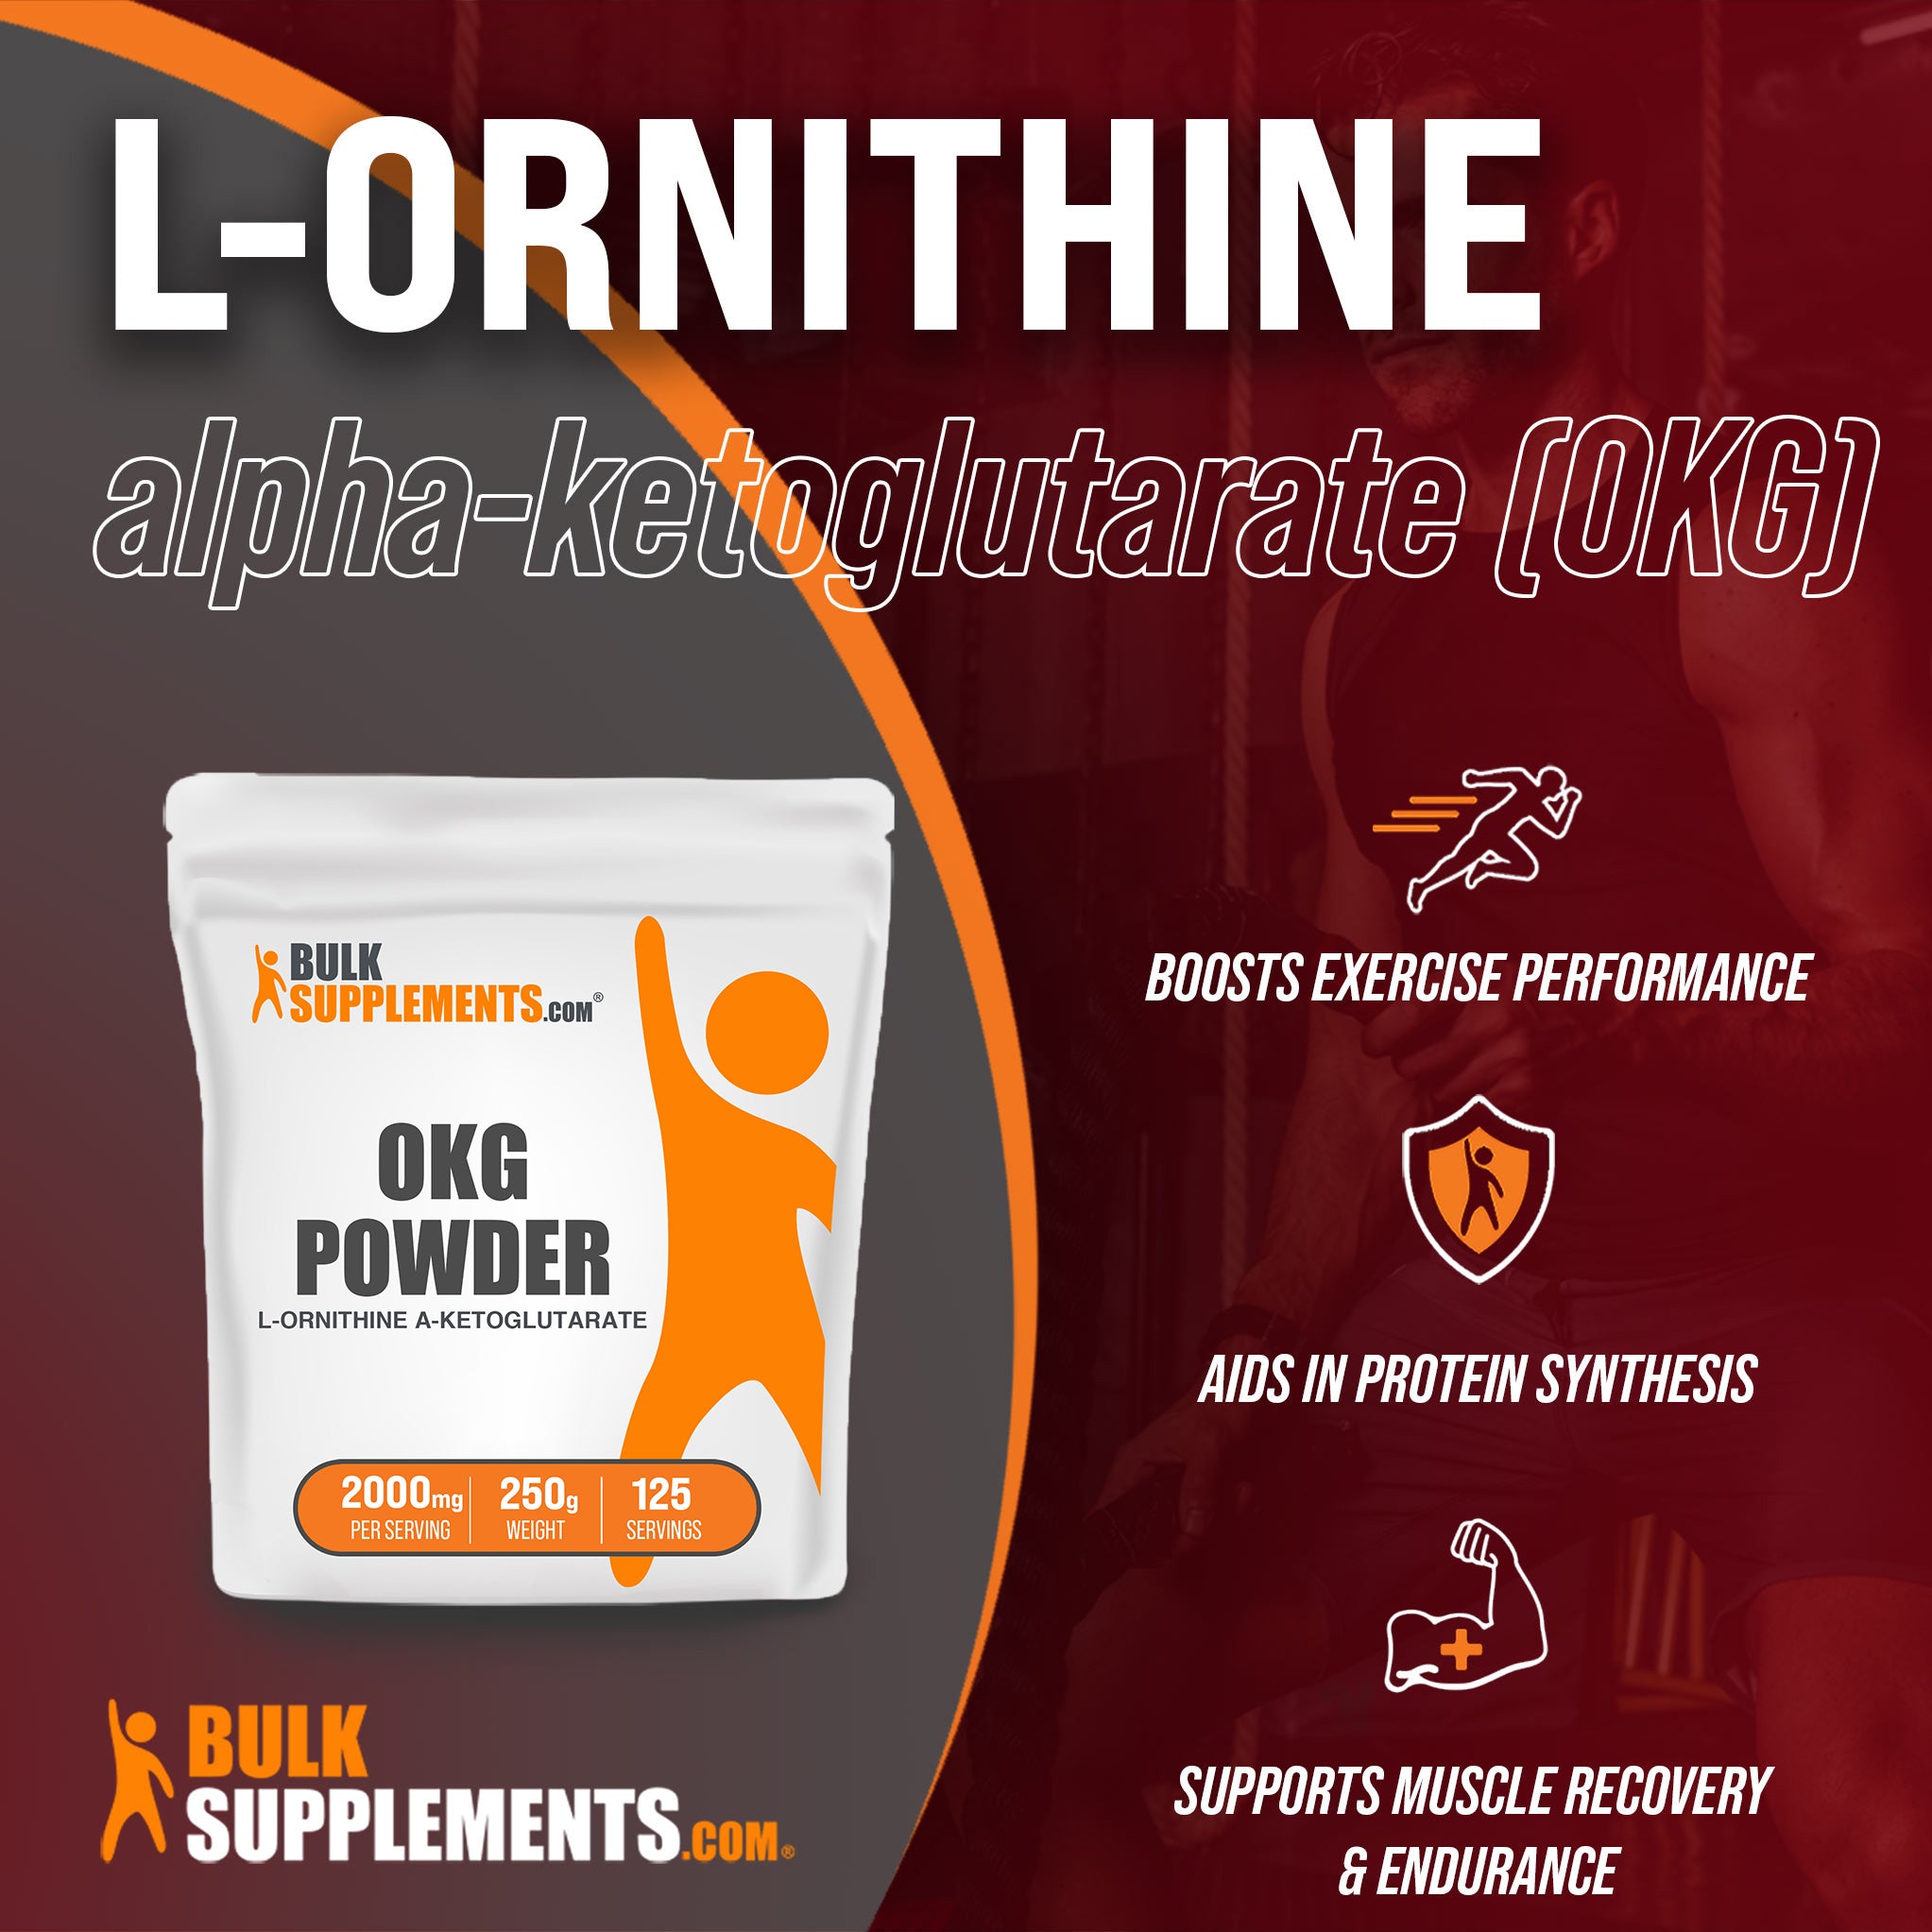 Benefits of L-Ornithine a-Ketoglutarate (OKG): boosts exercise performance, aids in protein synthesis, supports muscle recovery and endurance